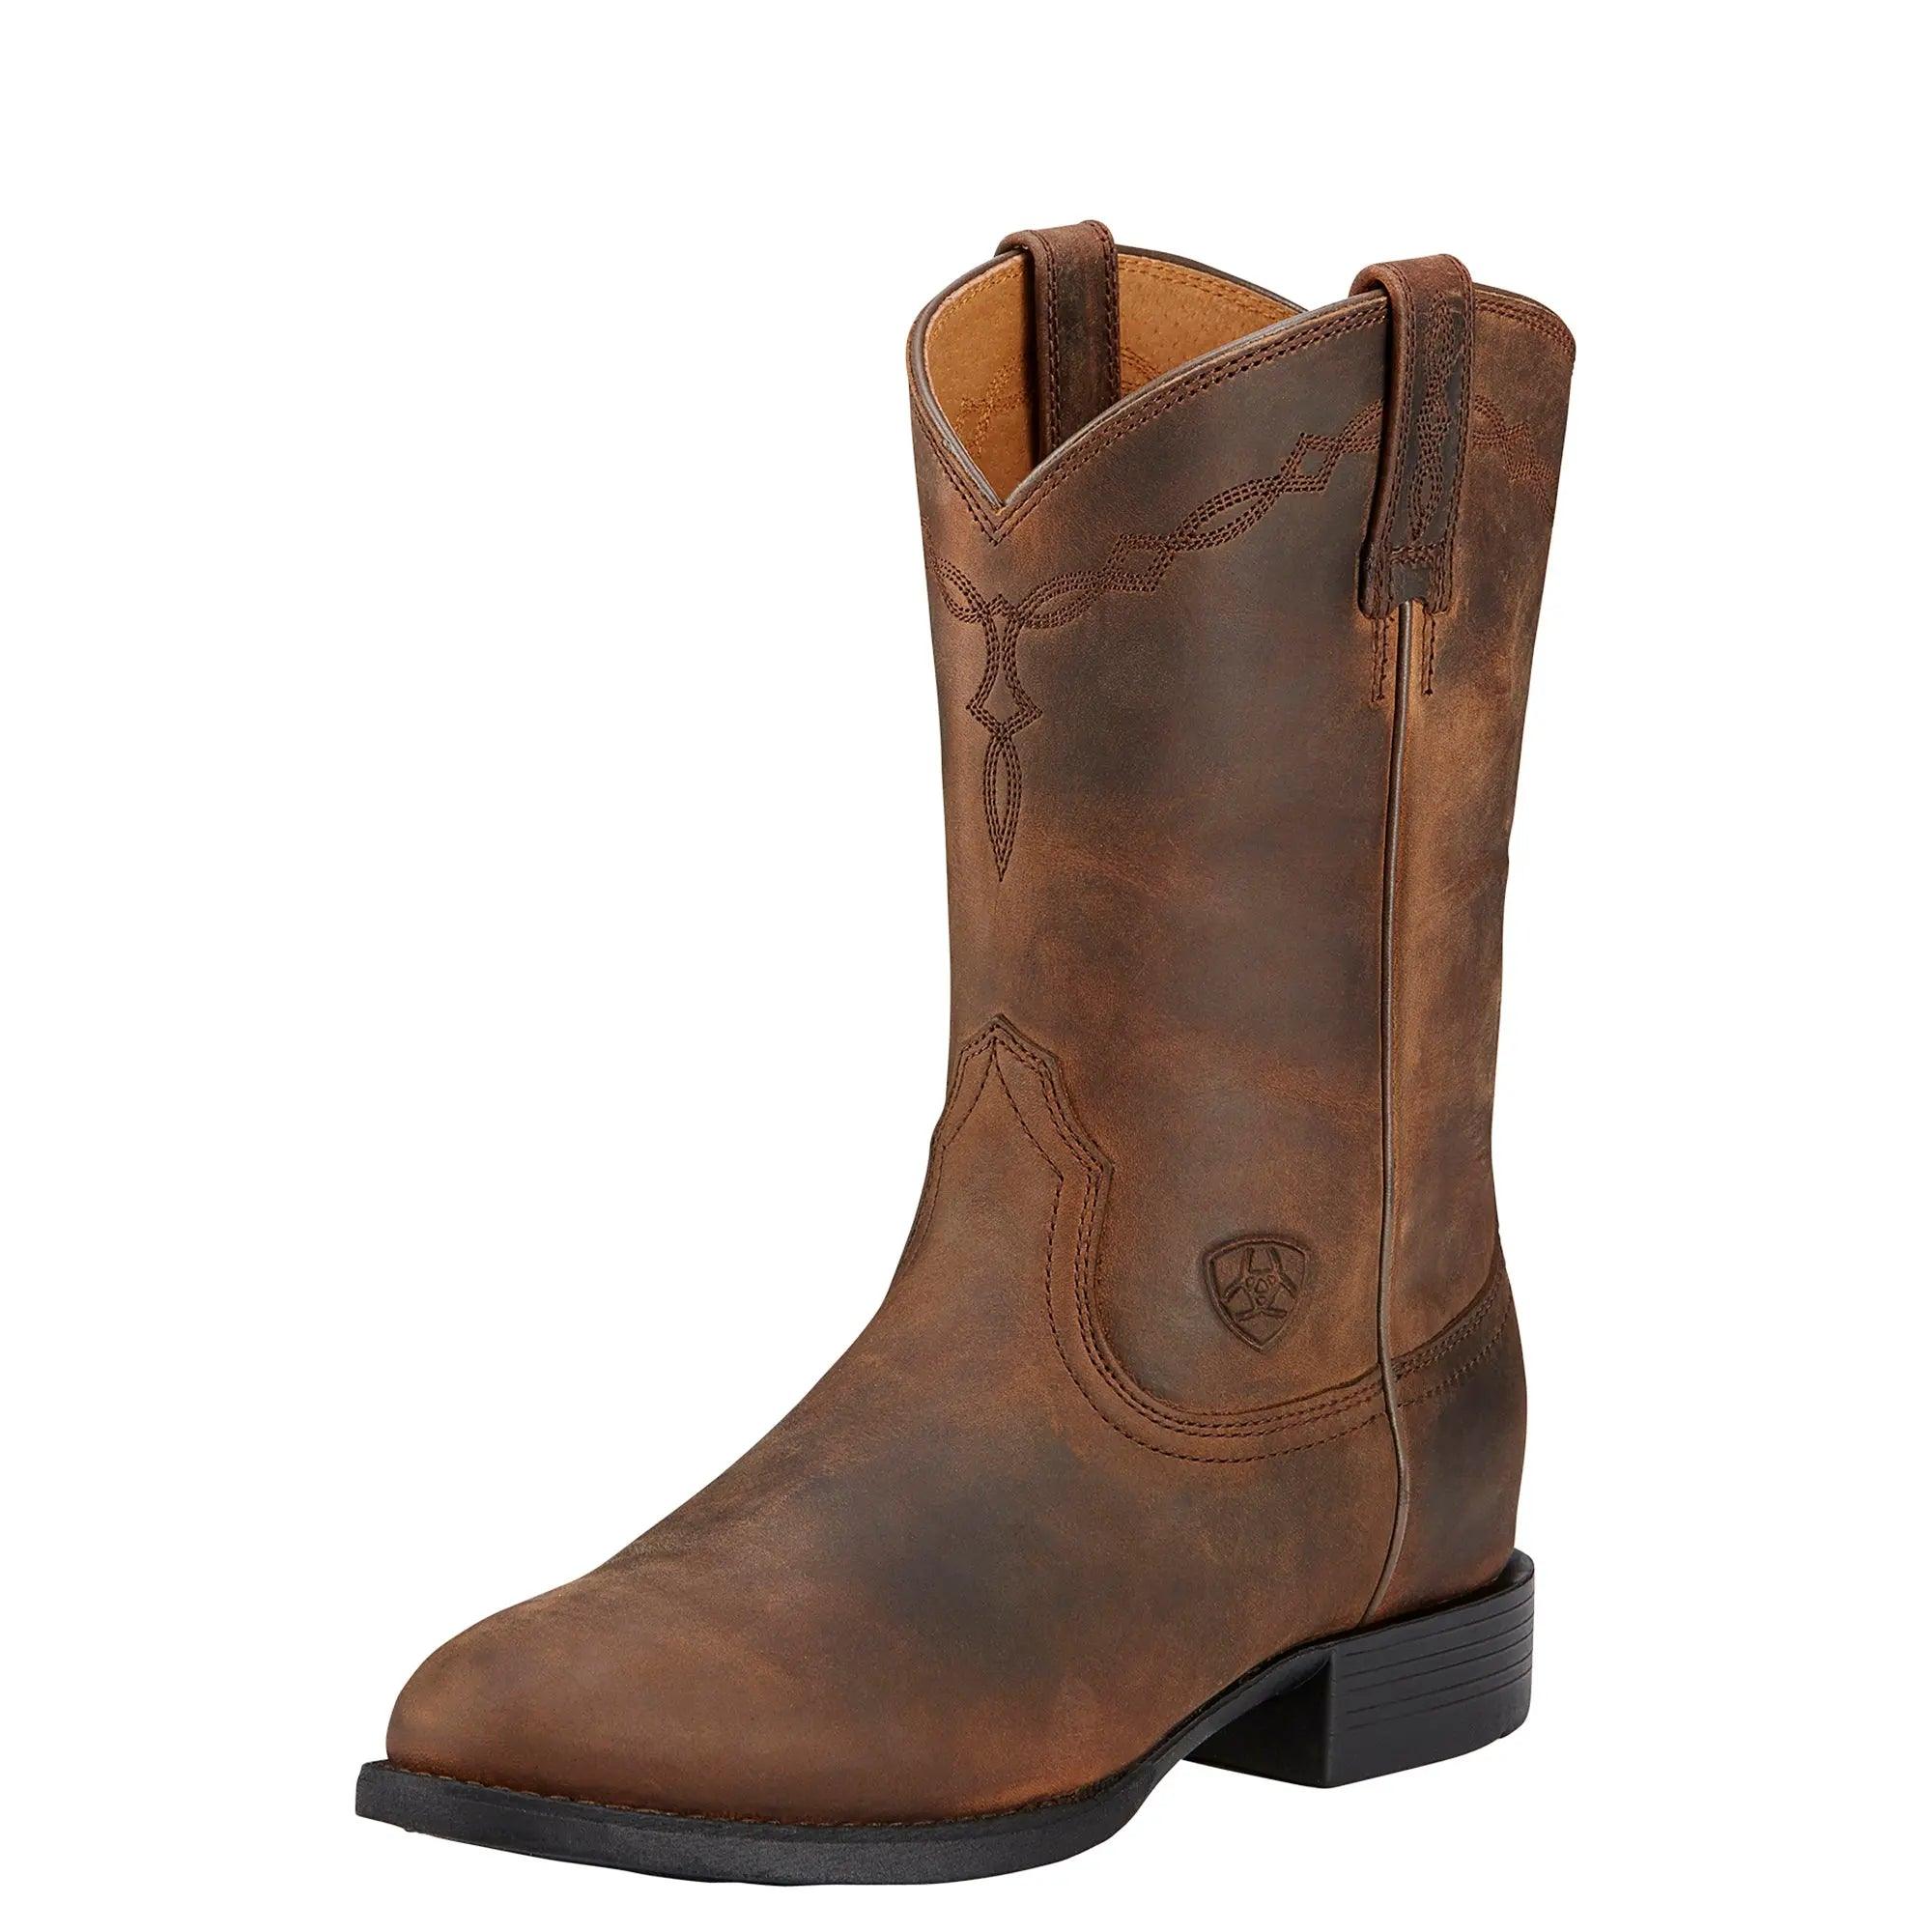 Ariat heritage R toe western boot for ladies